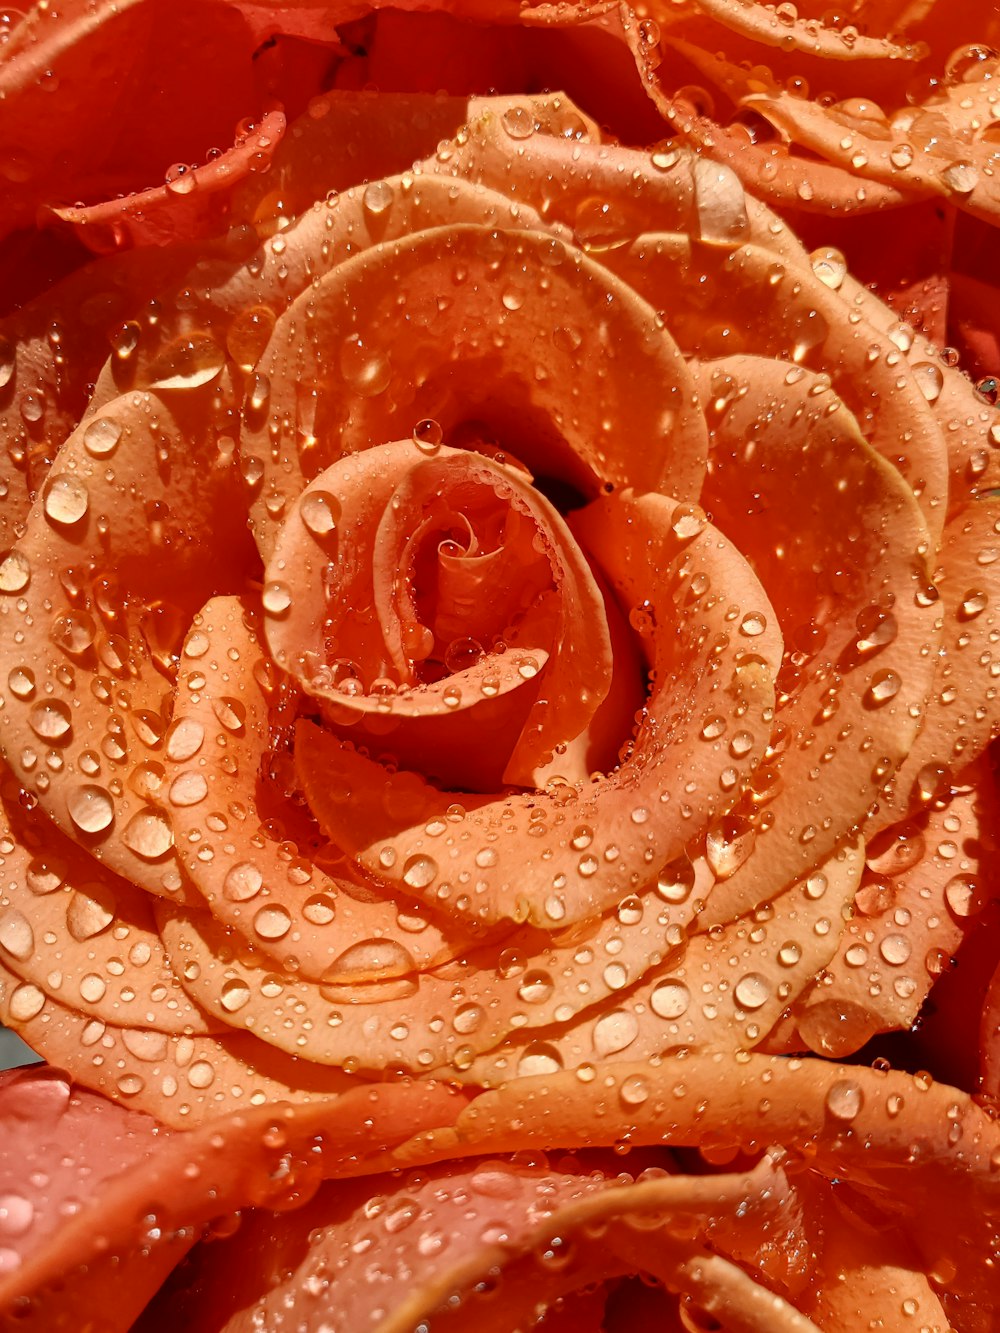 a close up of a rose with water droplets on it